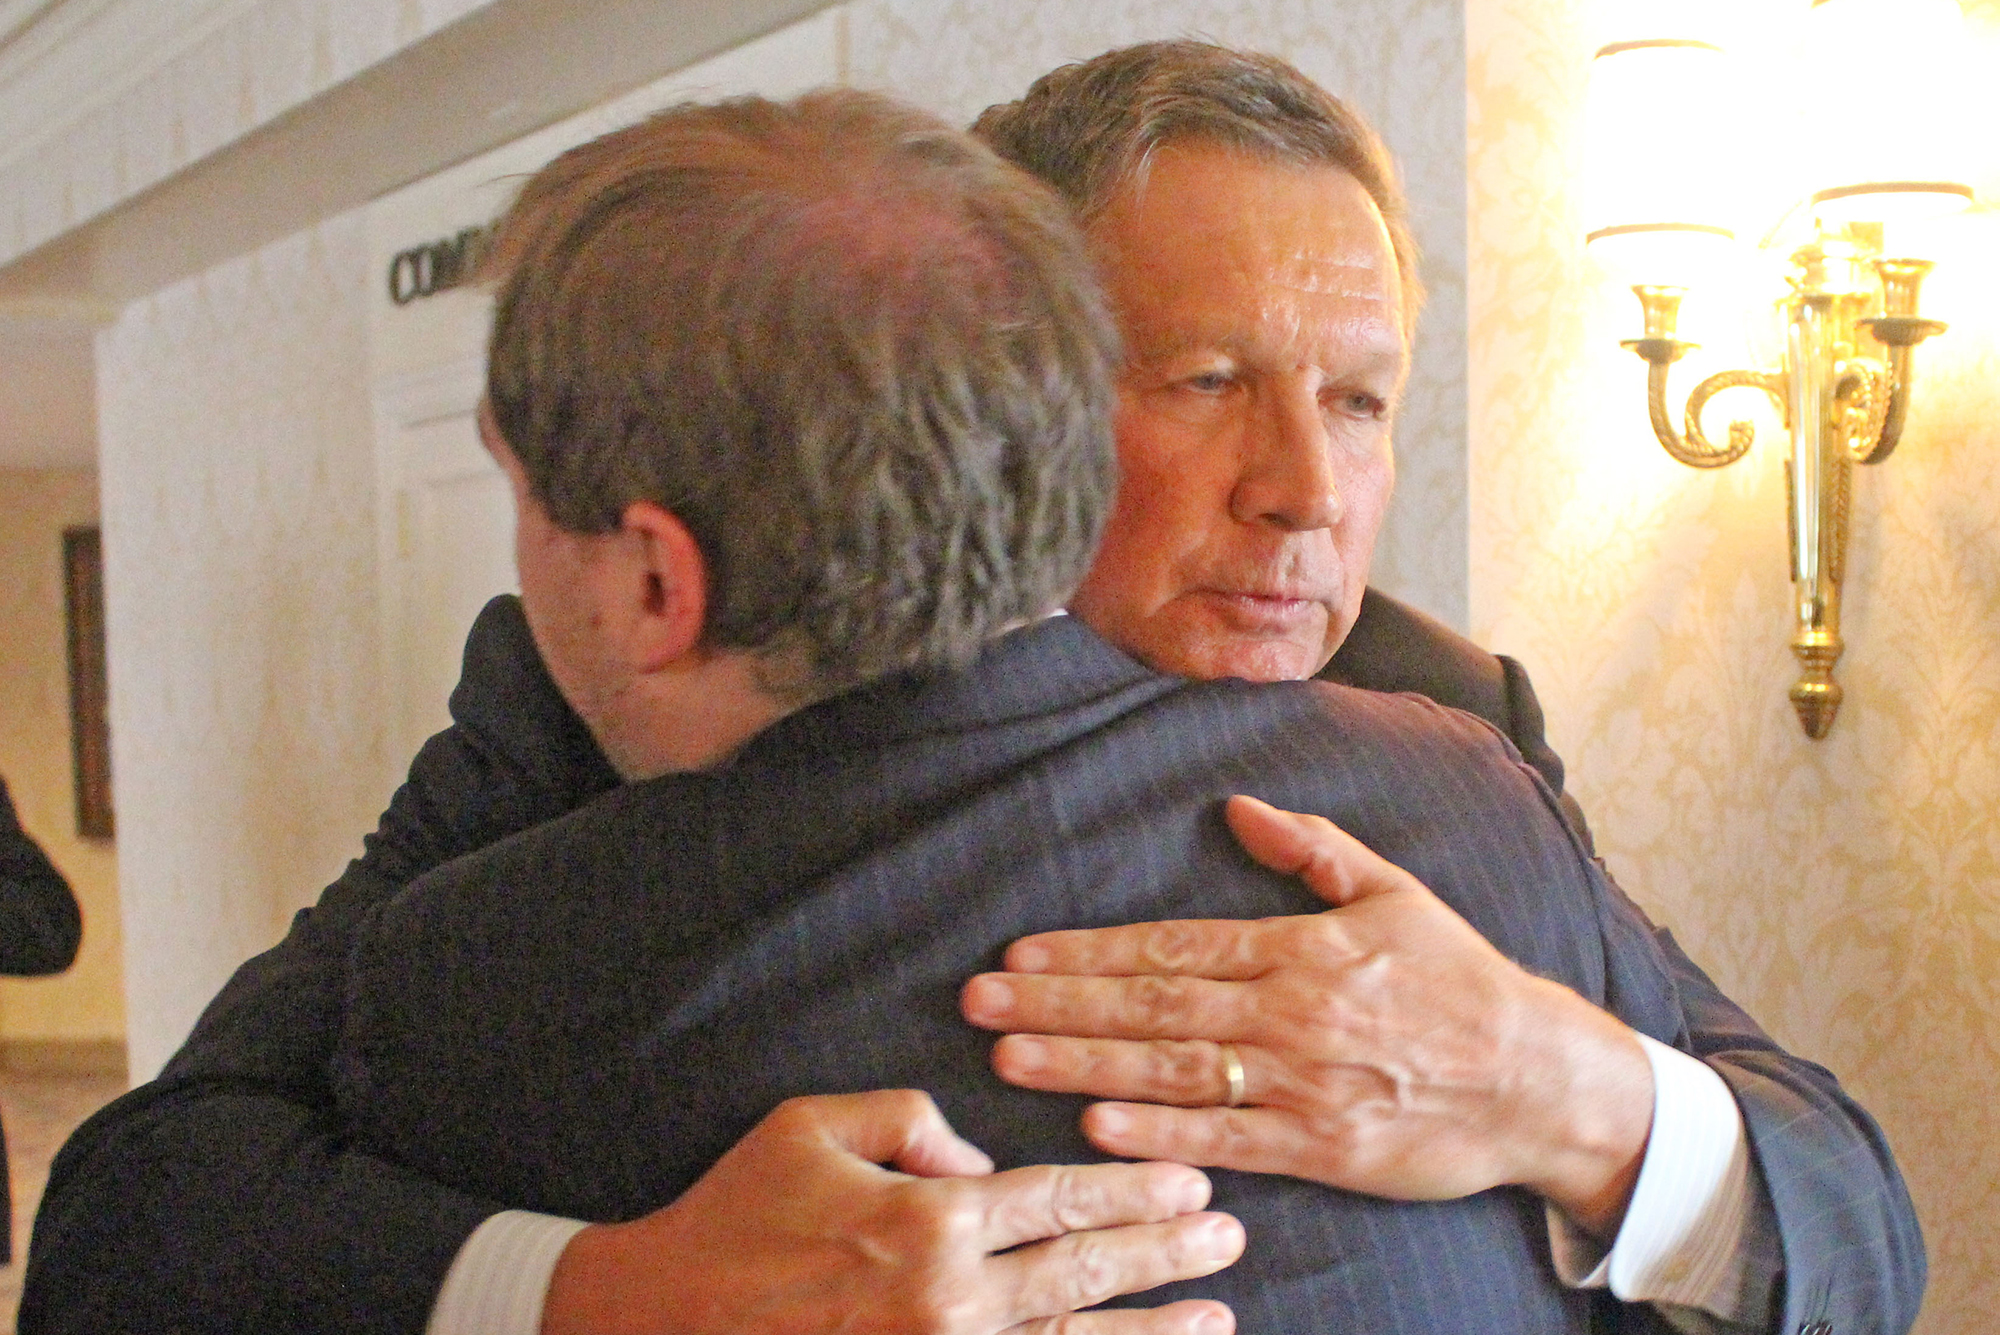 During the summer, Gov. John Kasich hugged James after having a conversation about Autism and Asperger's, which James has.